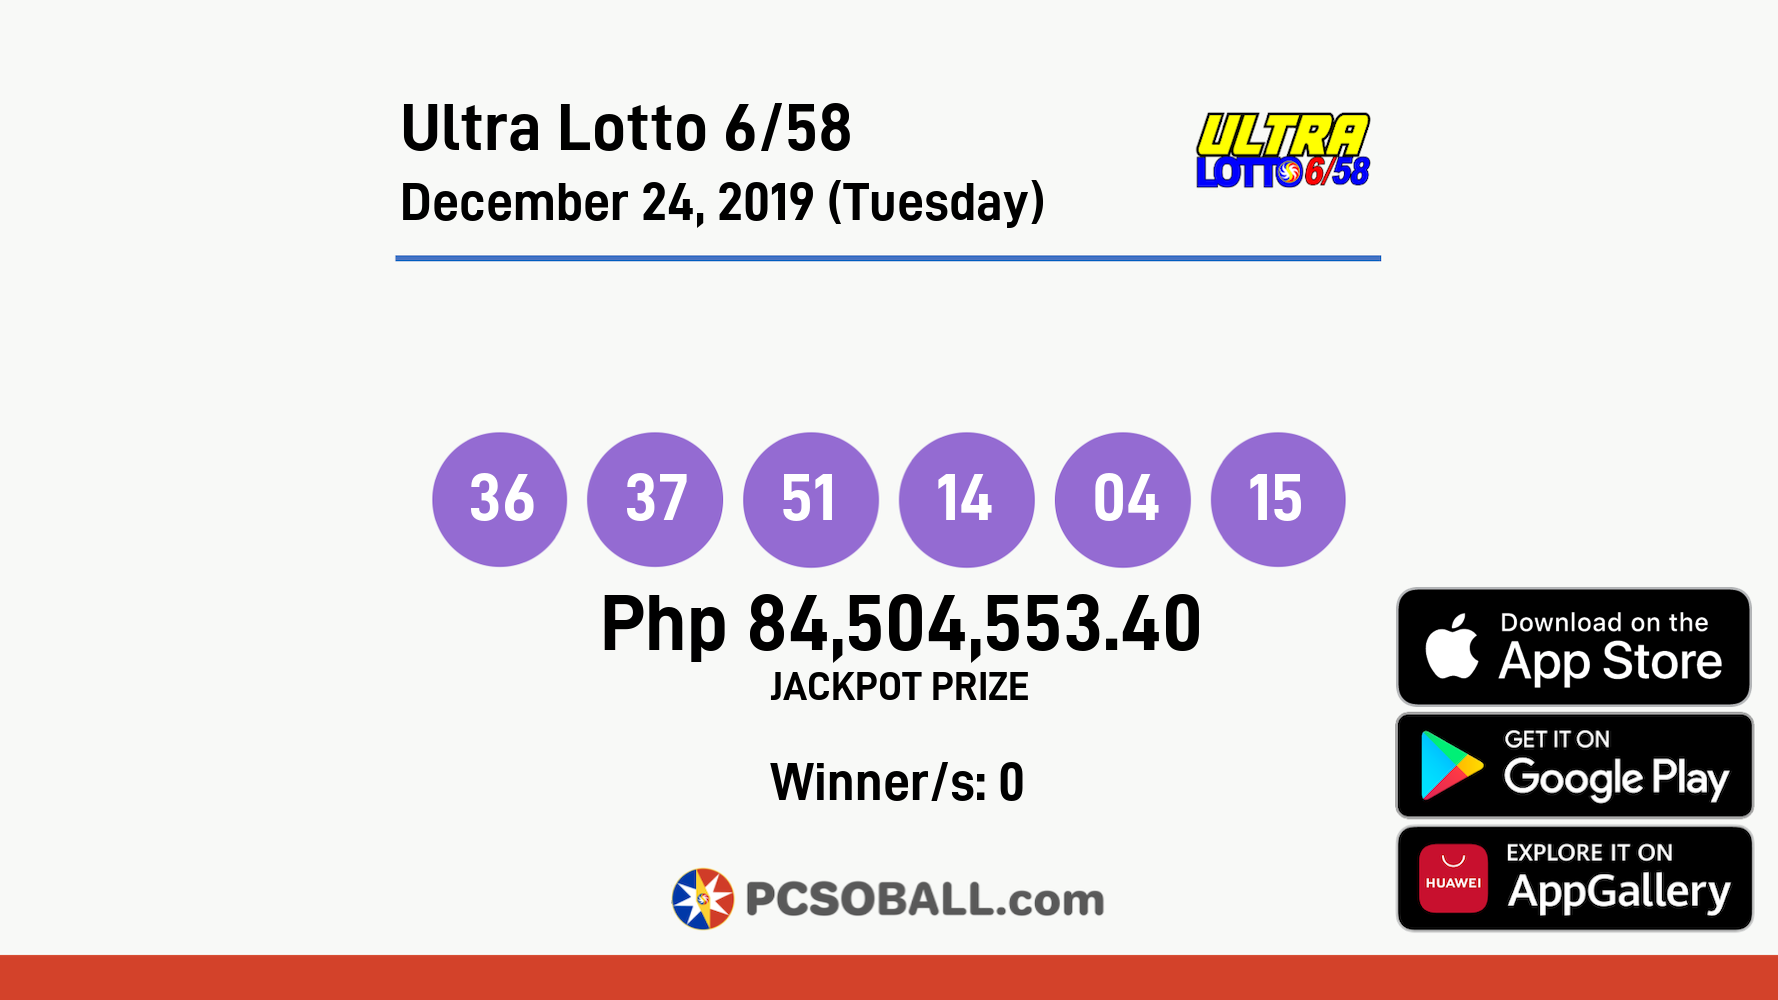 Ultra Lotto 6/58 December 24, 2019 (Tuesday) Result